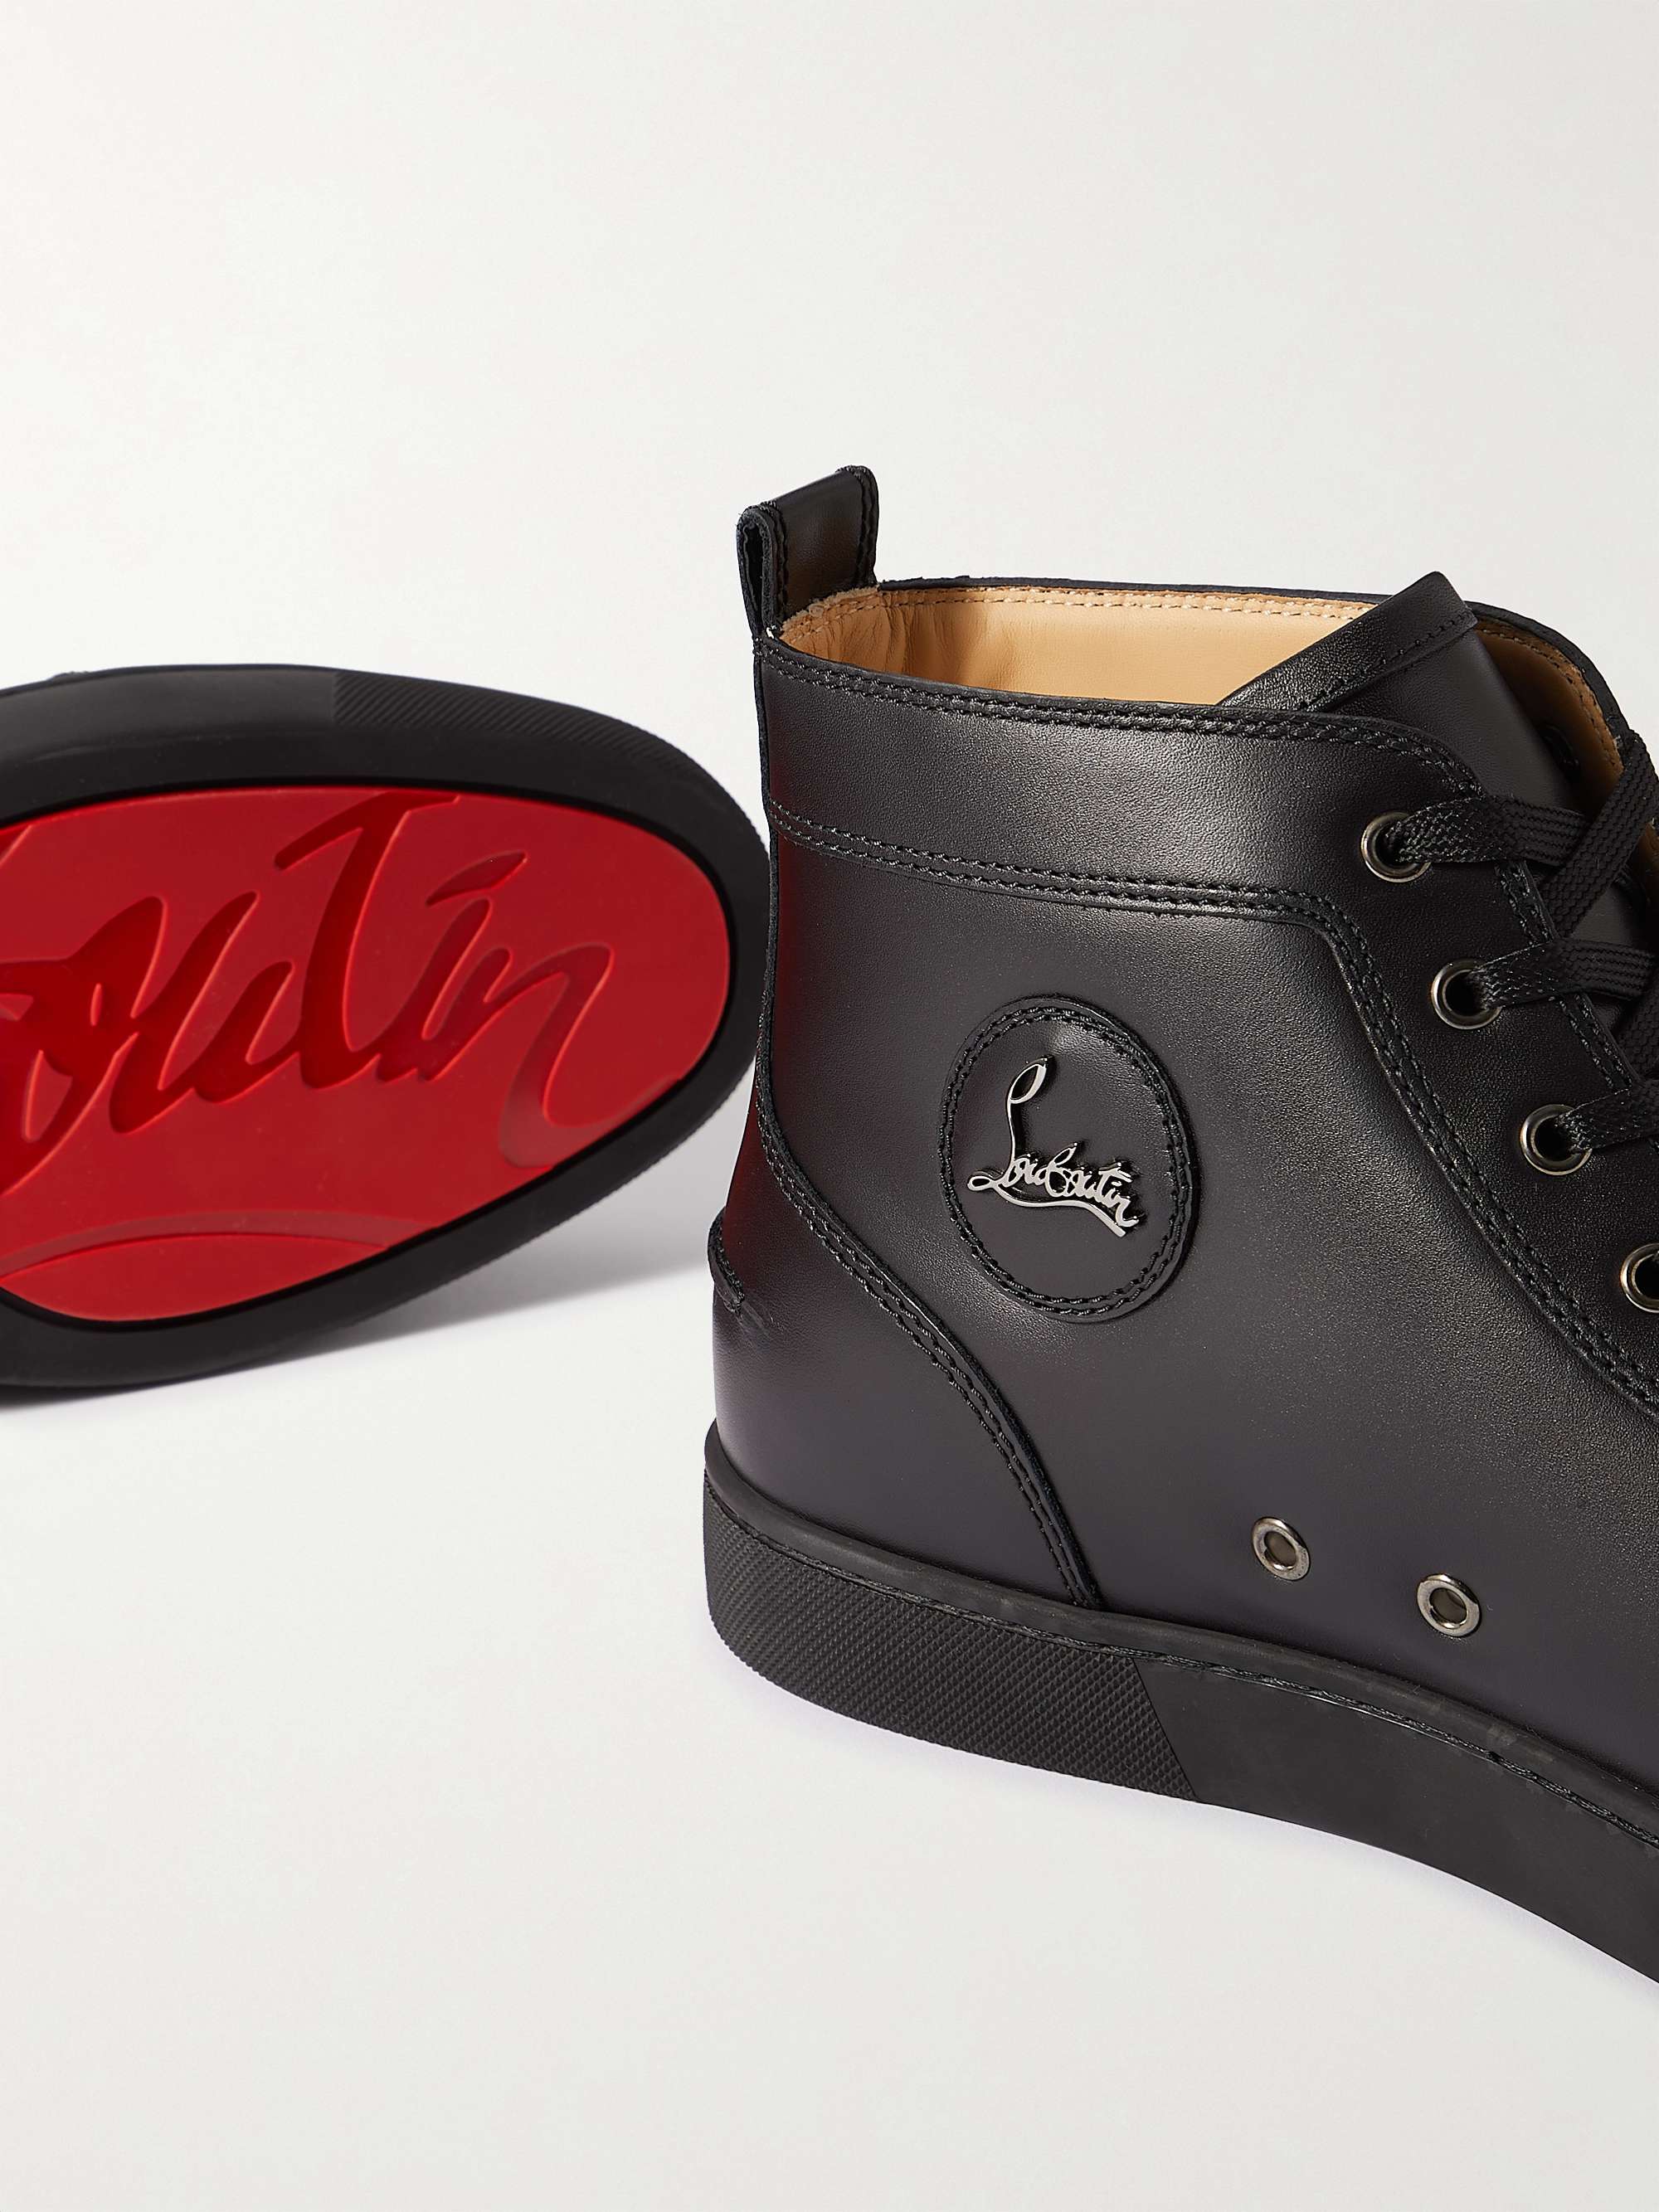 CHRISTIAN LOUBOUTIN Louis Leather High-Top Sneakers | MR PORTER